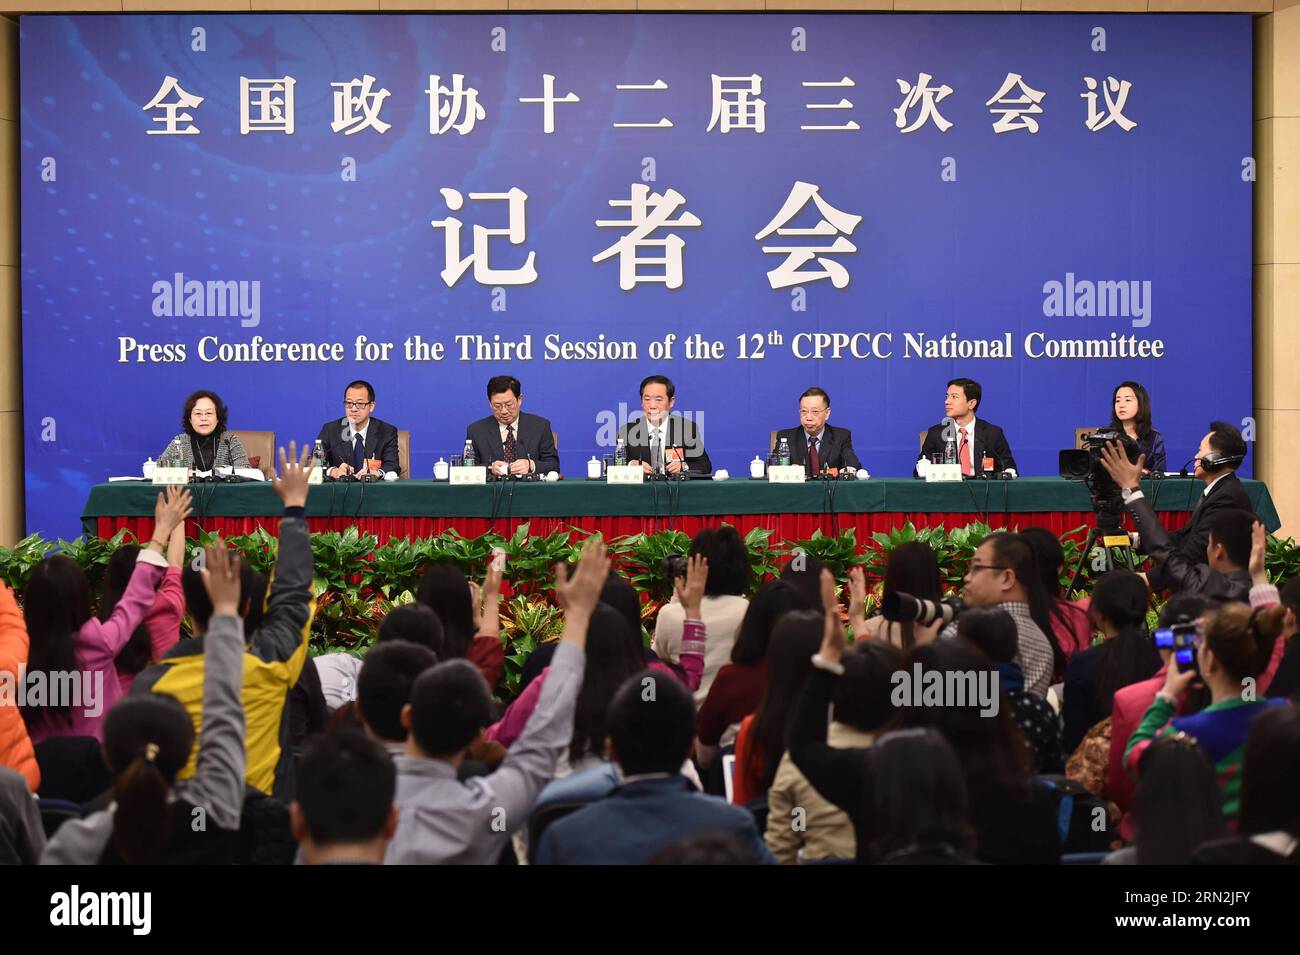 (150311) -- BEIJING, March 11, 2015 -- Zhu Weiqun(C), Huang Jiefu(3rd R), Hu Xiaoyi(3rd L), Li Yanhong(2nd R), Yu Minhong(2nd L), members of the 12th National Committee of the Chinese People s Political Consultative Conference (CPPCC), give a press conference during the third session of the 12th CPPCC National Committee in Beijing, capital of China, March 11, 2015. ) (yxb) (TWO SESSIONS) CHINA-BEIJING-CPPCC-PRESS CONFERENCE (CN) LixXin PUBLICATIONxNOTxINxCHN   Beijing March 11 2015 Zhu  C Huang Jiefu 3rd r HU Xiaoyi 3rd l left  2nd r Yu  2nd l Members of The 12th National Committee of The Chin Stock Photo